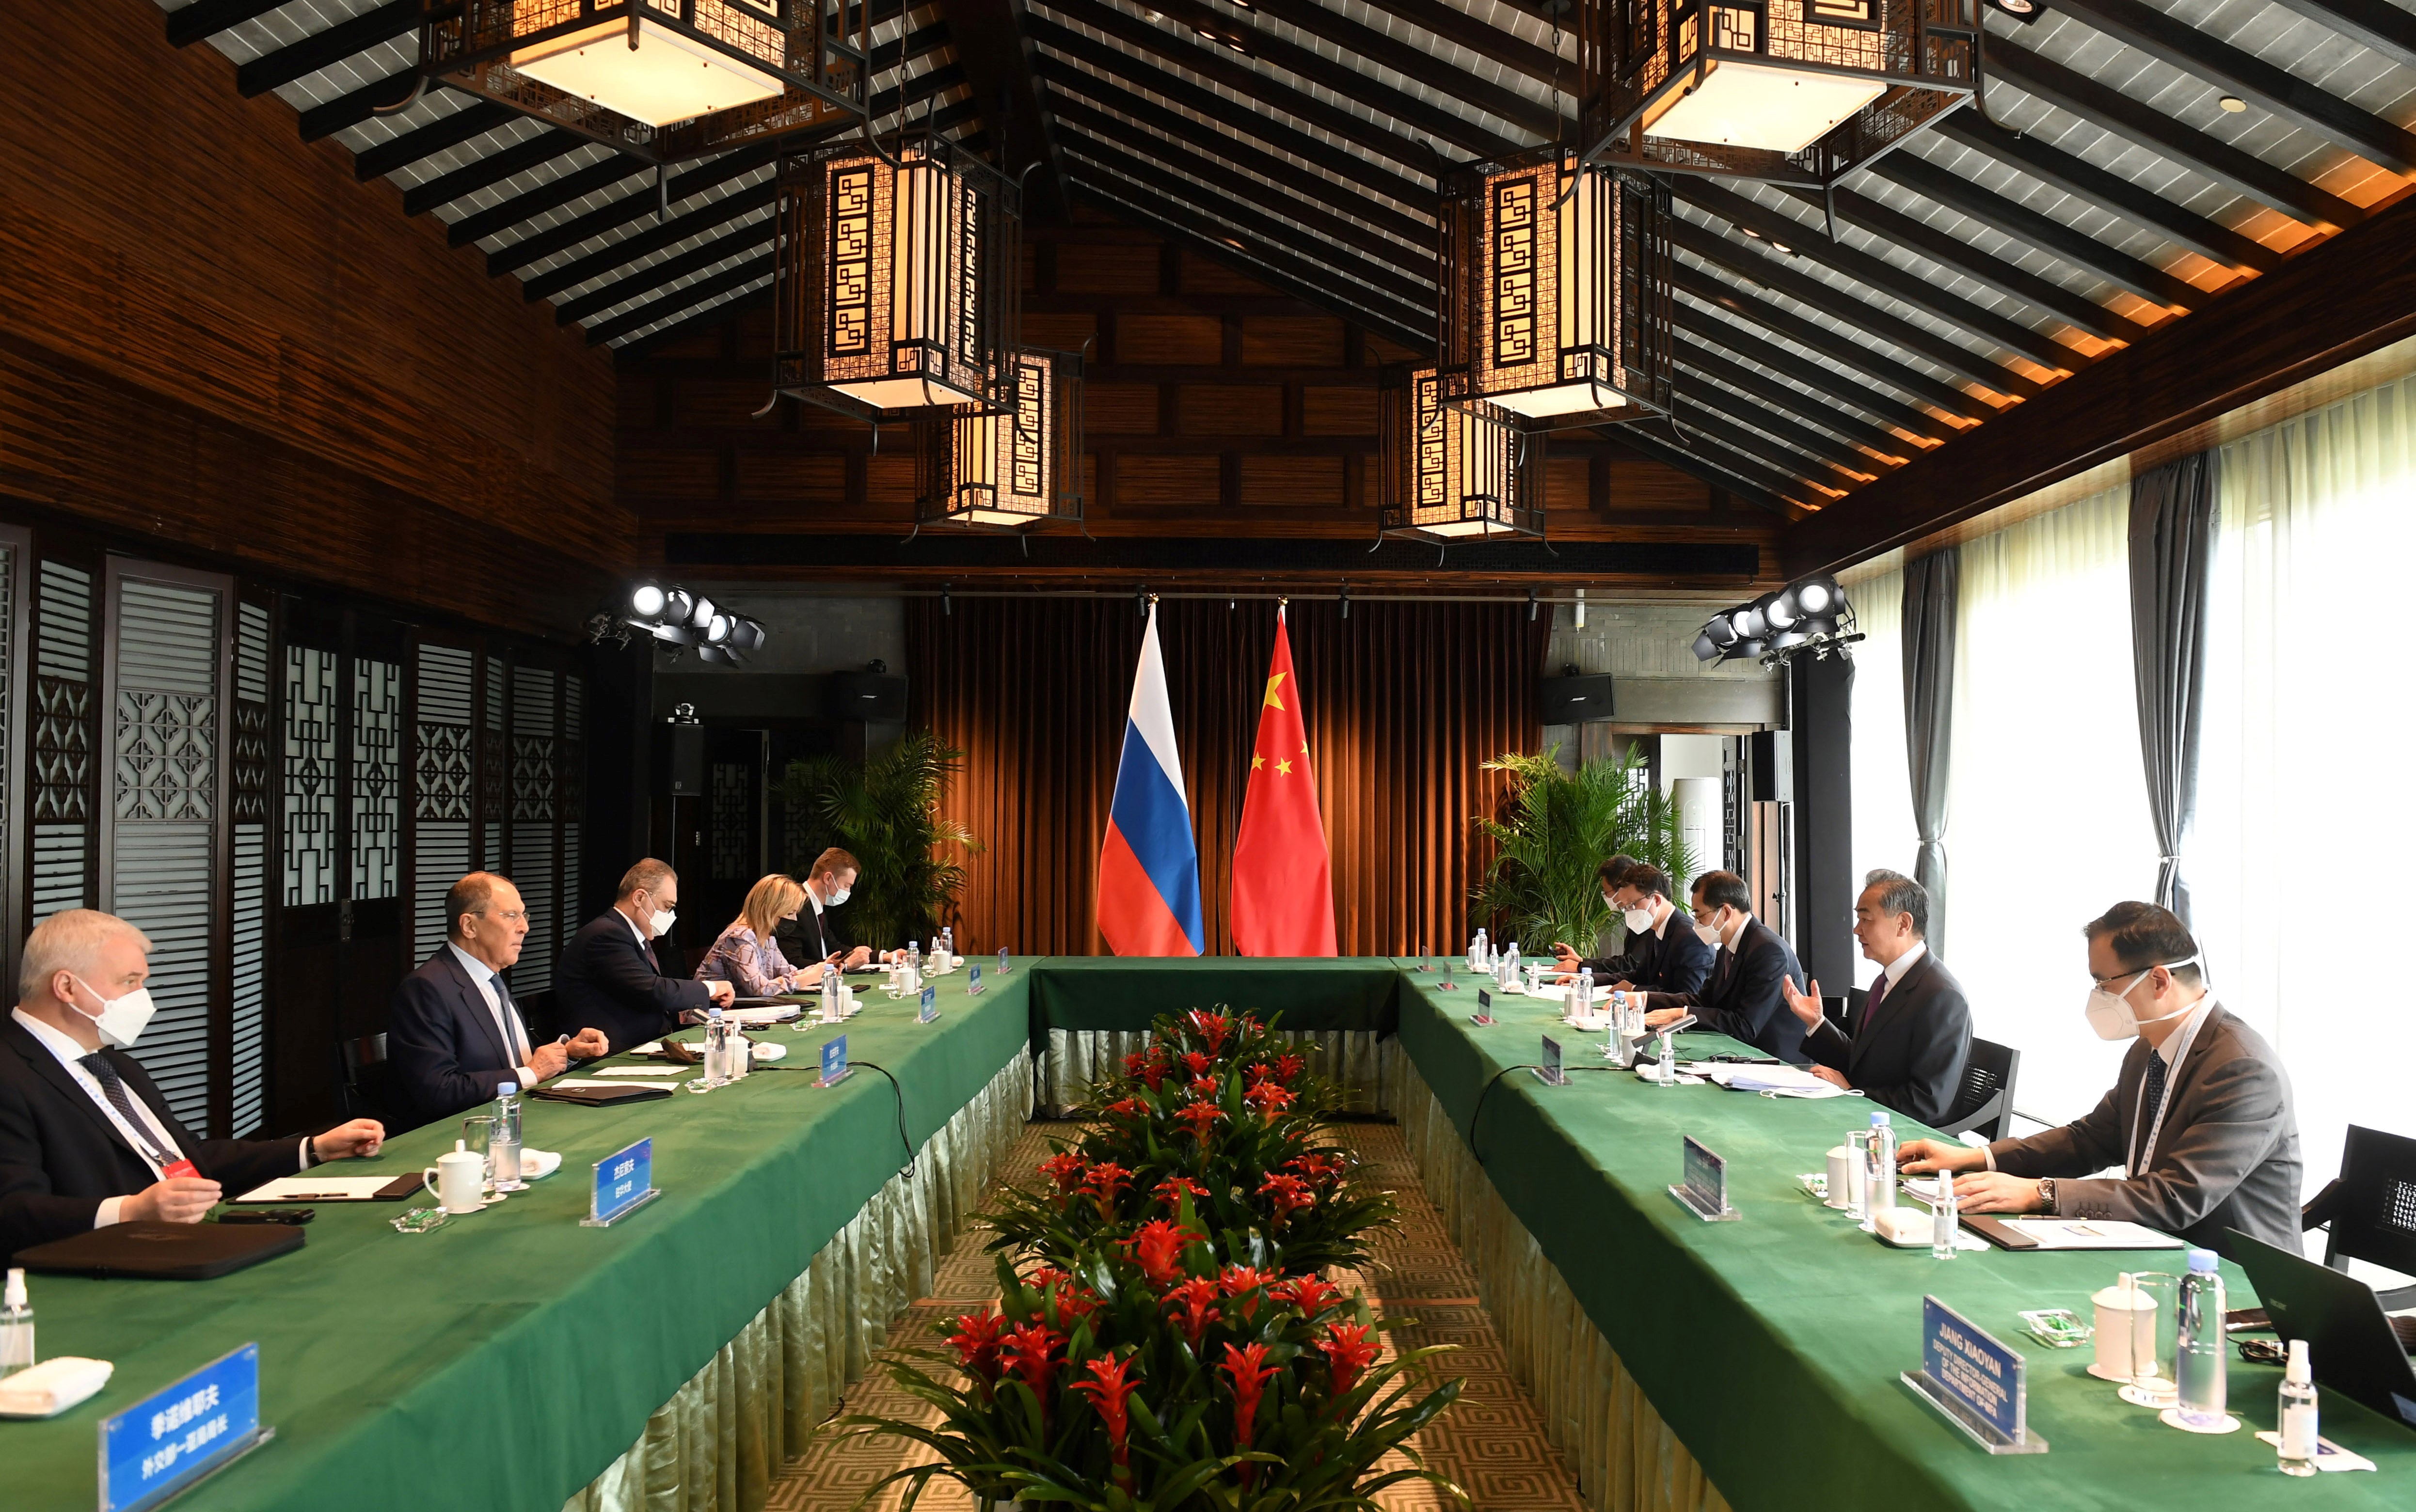 Russian Foreign Minister Sergey Lavrov, center left, holds talks with Chinese Foreign Minister Wang Yi, center right, in Tunxi, China, on March 30.